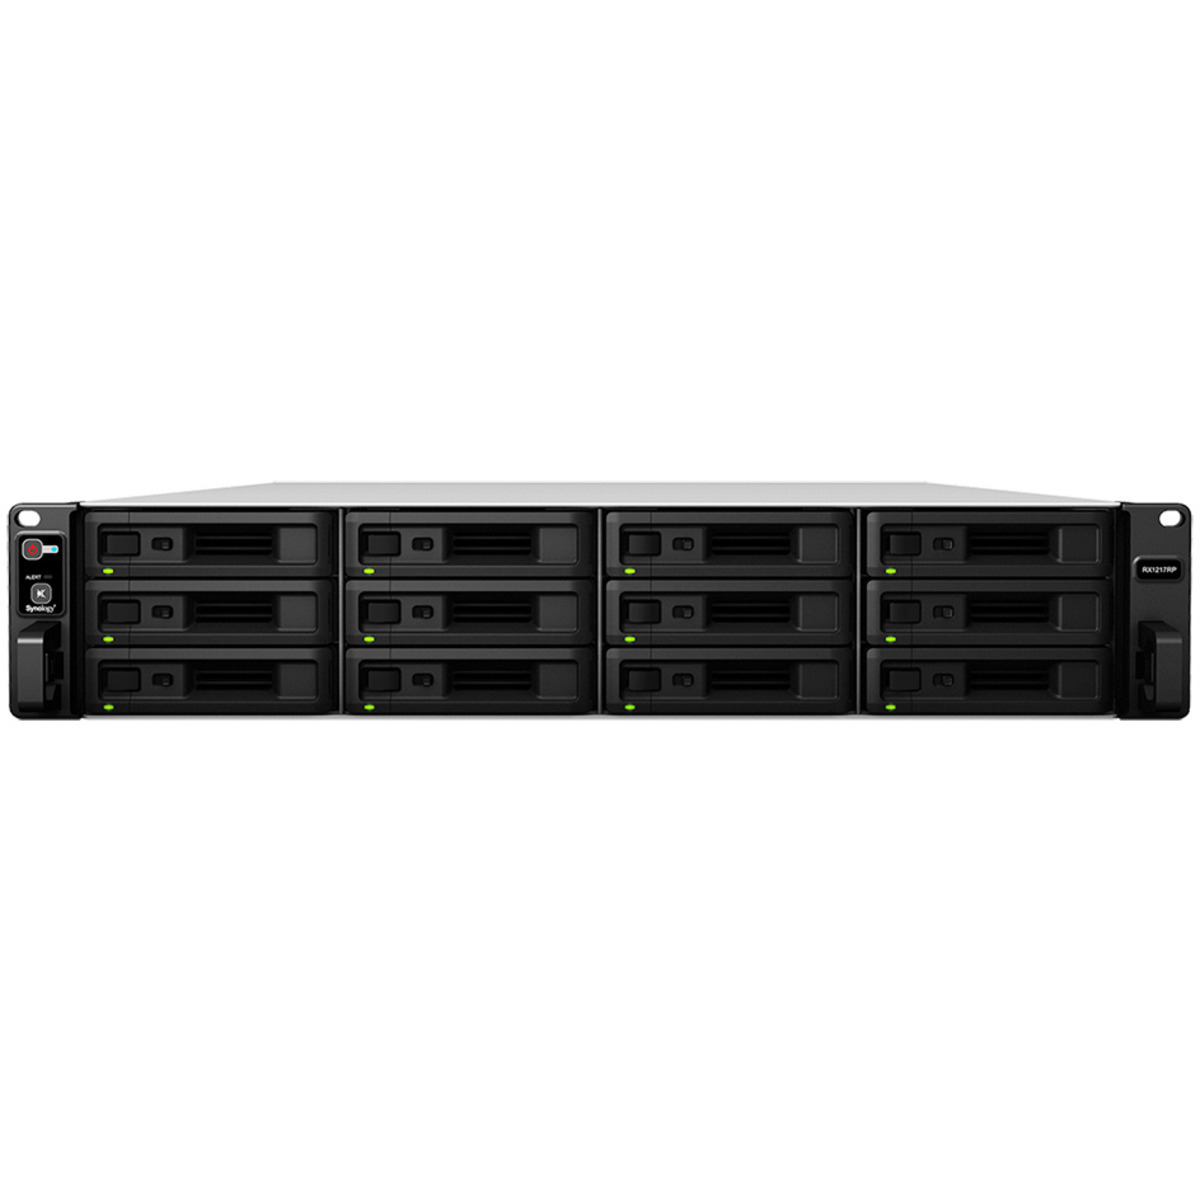 buy $5556 Synology RX1217RP 24tb RackMount Expansion Enclosure 12x2000gb Western Digital Red SA500 WDS200T1R0A 2.5 SATA 6Gb/s SSD NAS Class Drives Installed - Burn-In Tested - nas headquarters buy network attached storage server device das new raid-5 free shipping usa RX1217RP